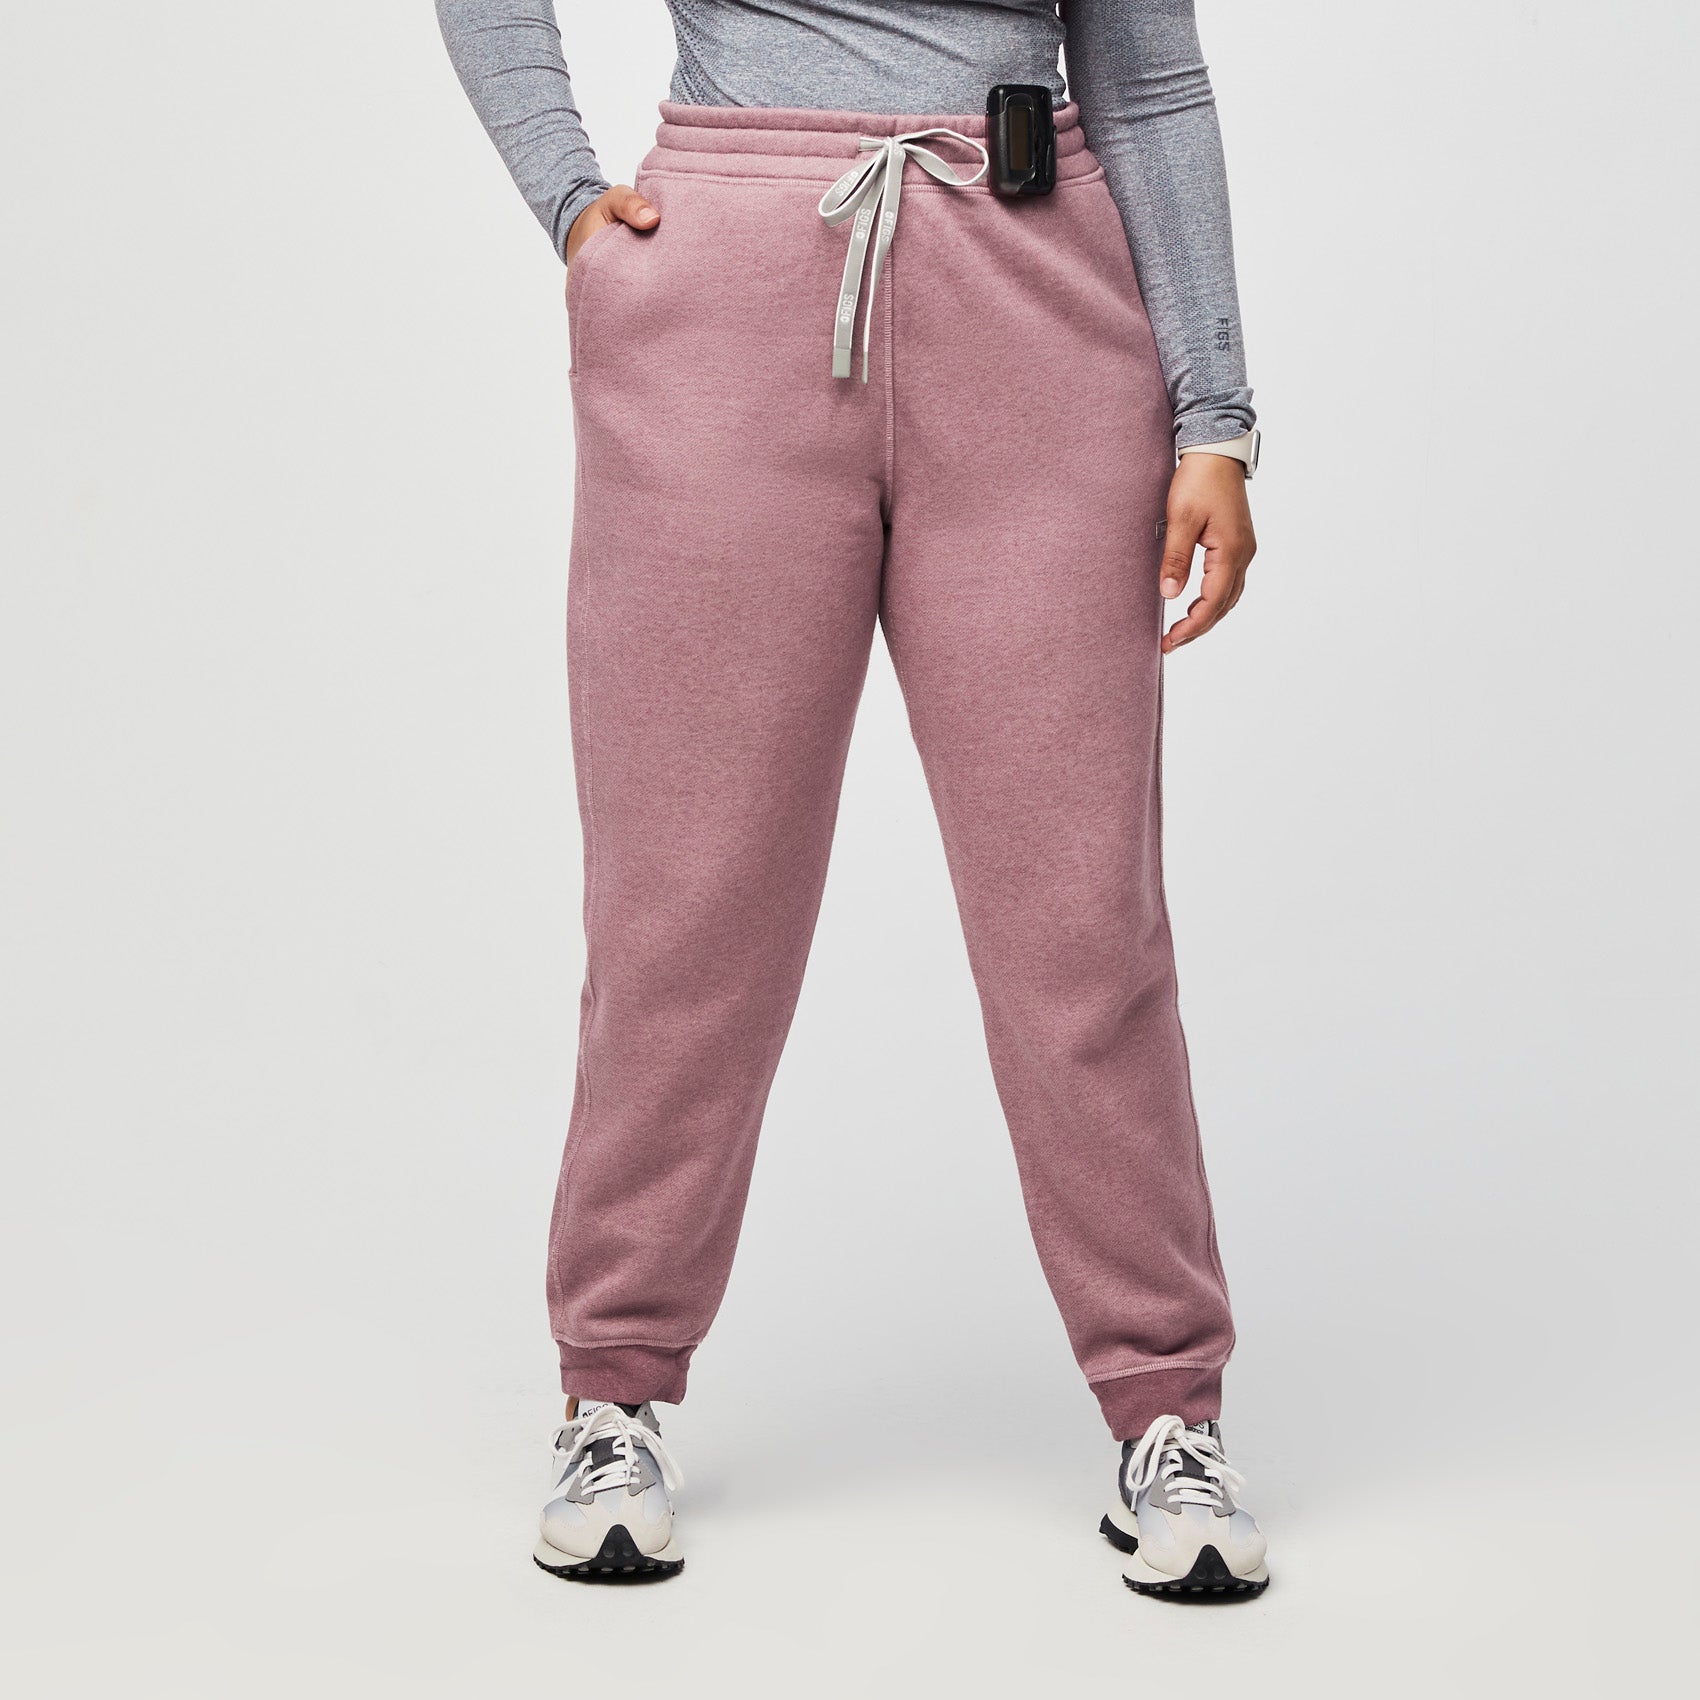 Jogger Mujer Color Gris – Moft